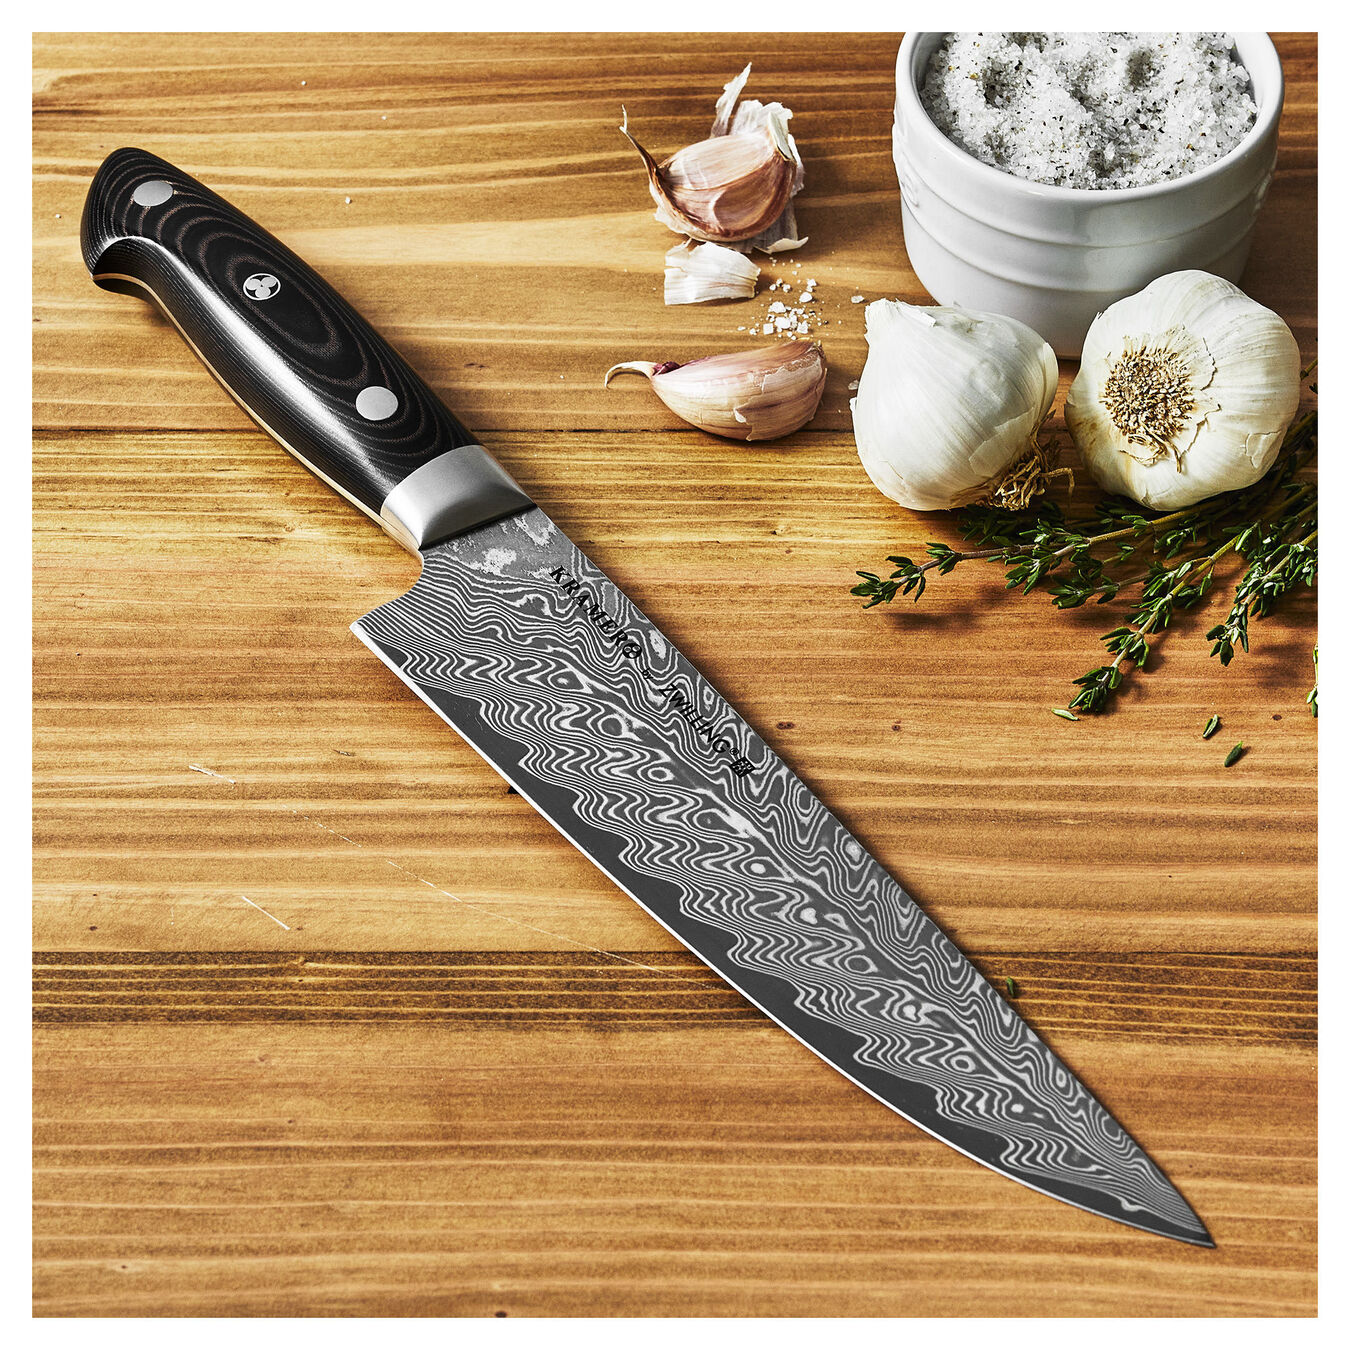 8-inch, Narrow Chef's Knife,,large 5